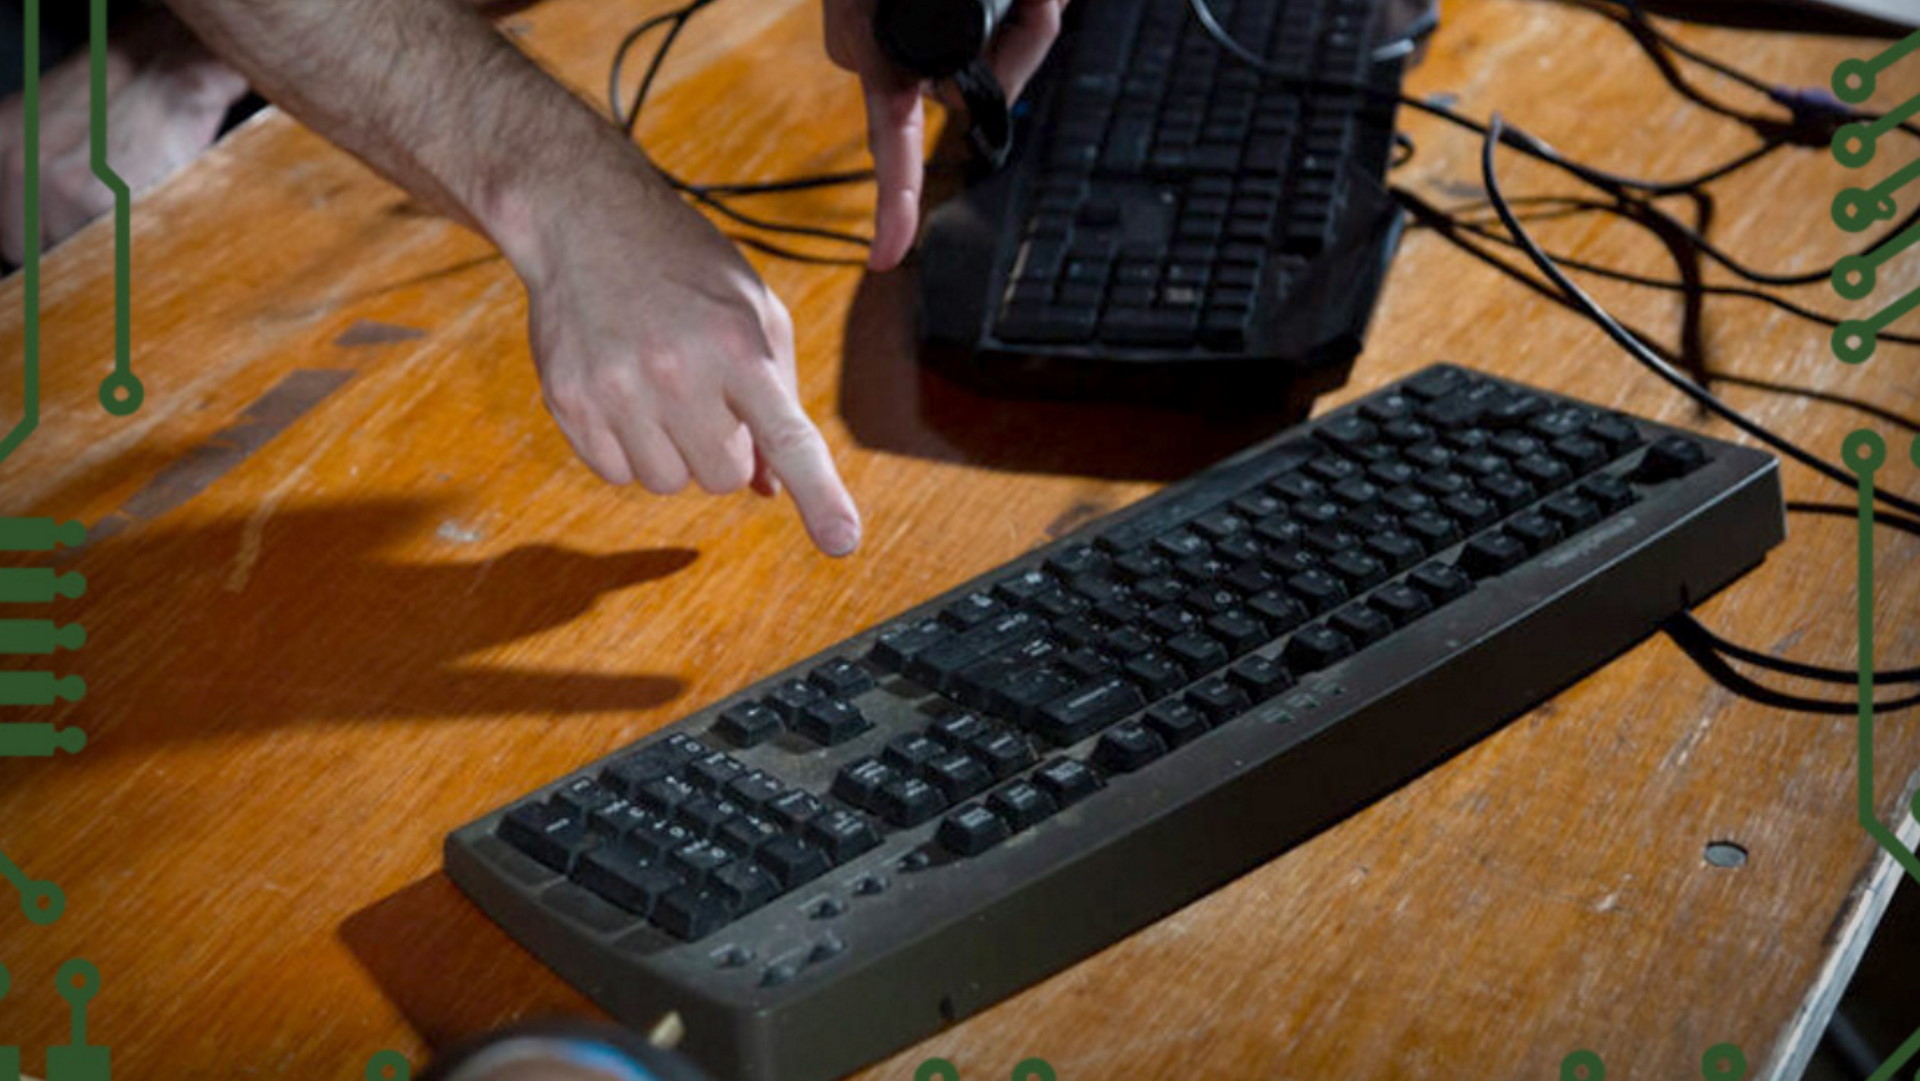  QuakeCon 2022 will feature dirty keyboards and Skryim sweet rolls 